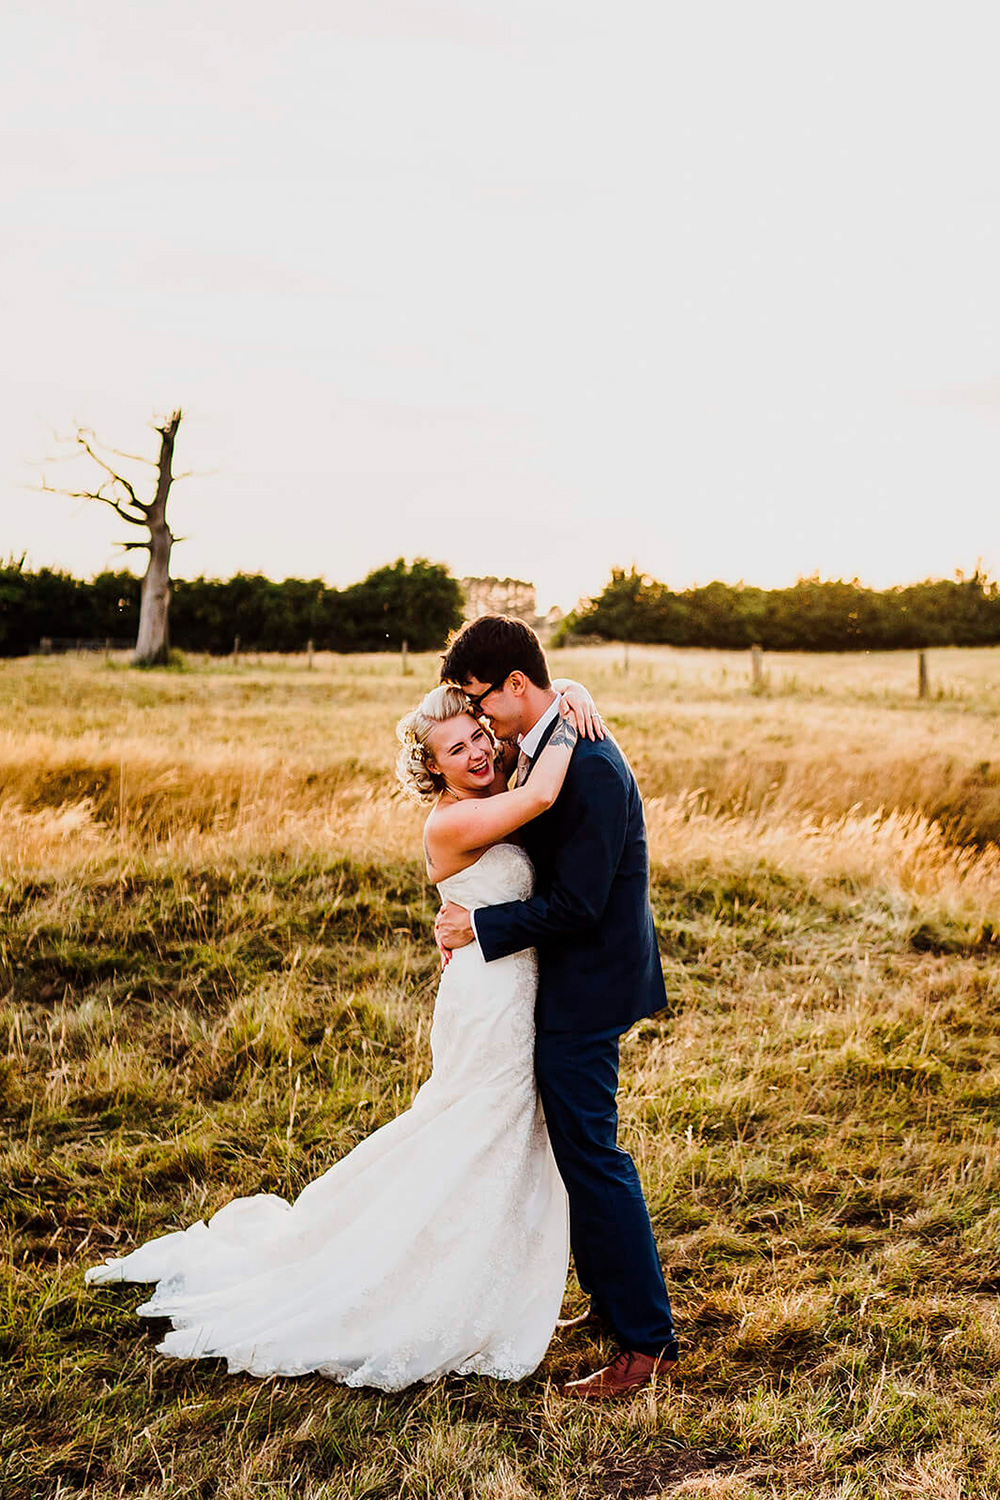 Lucy Simon Rustic Quirky Wedding Rob Dodsworth Photography SBS 032